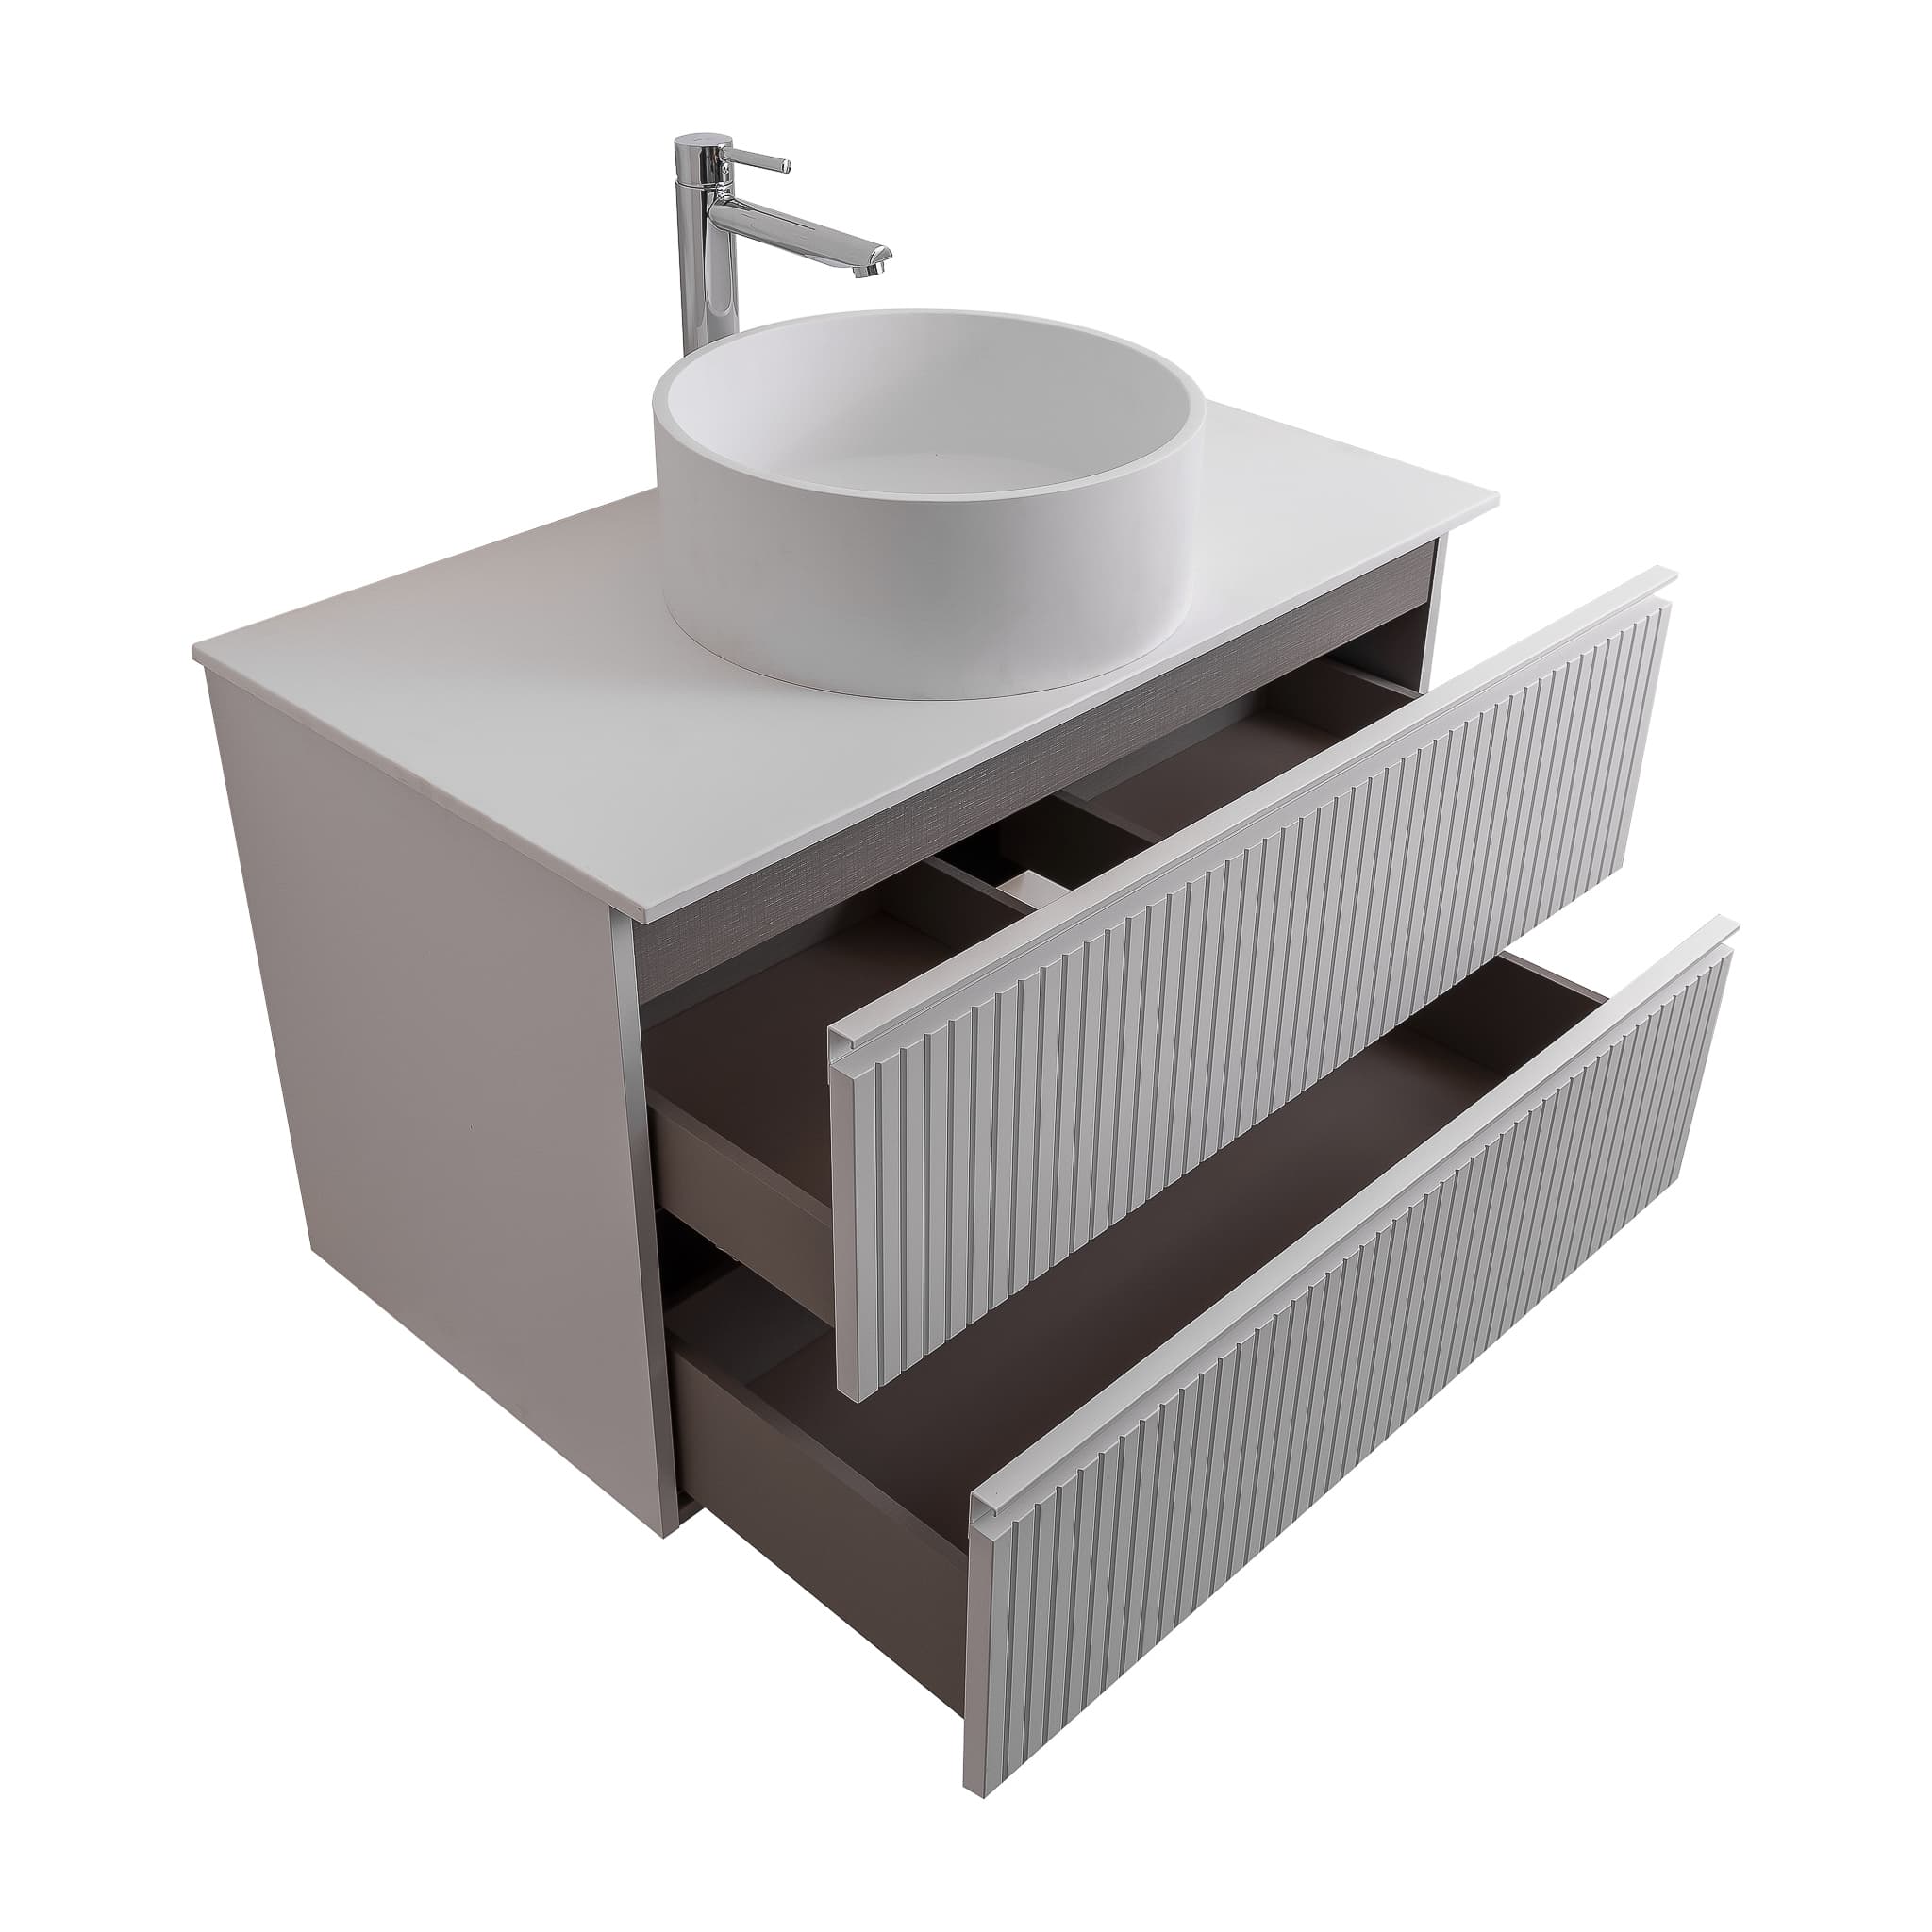 Ares 31.5 Matte White Cabinet, Solid Surface Flat White Counter And Round Solid Surface White Basin 1386, Wall Mounted Modern Vanity Set